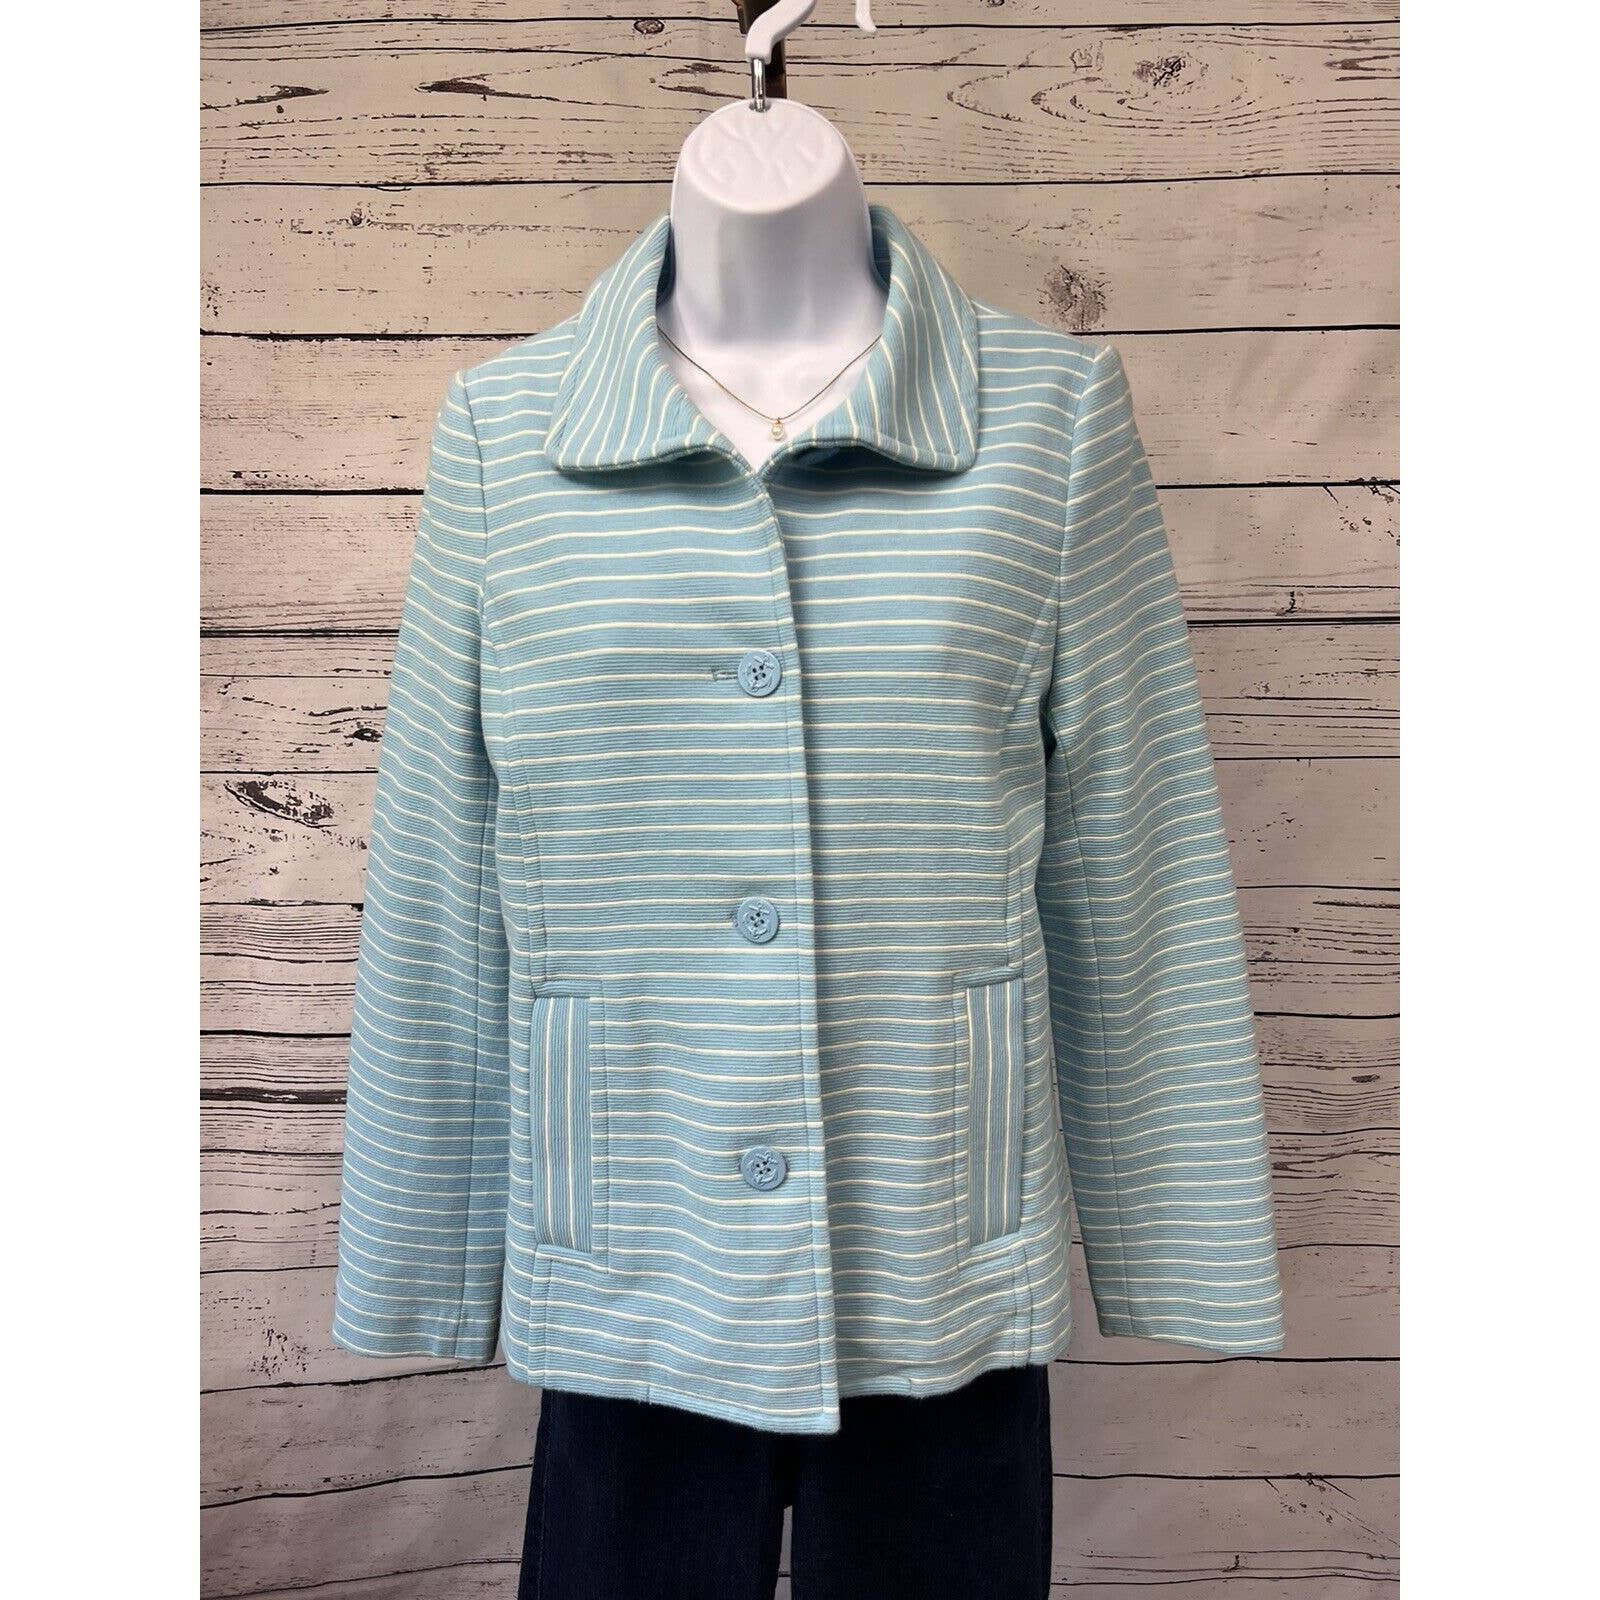 Talbots Jacket Women’s Small Blue Striped Nautical Button Up Stretch Casual